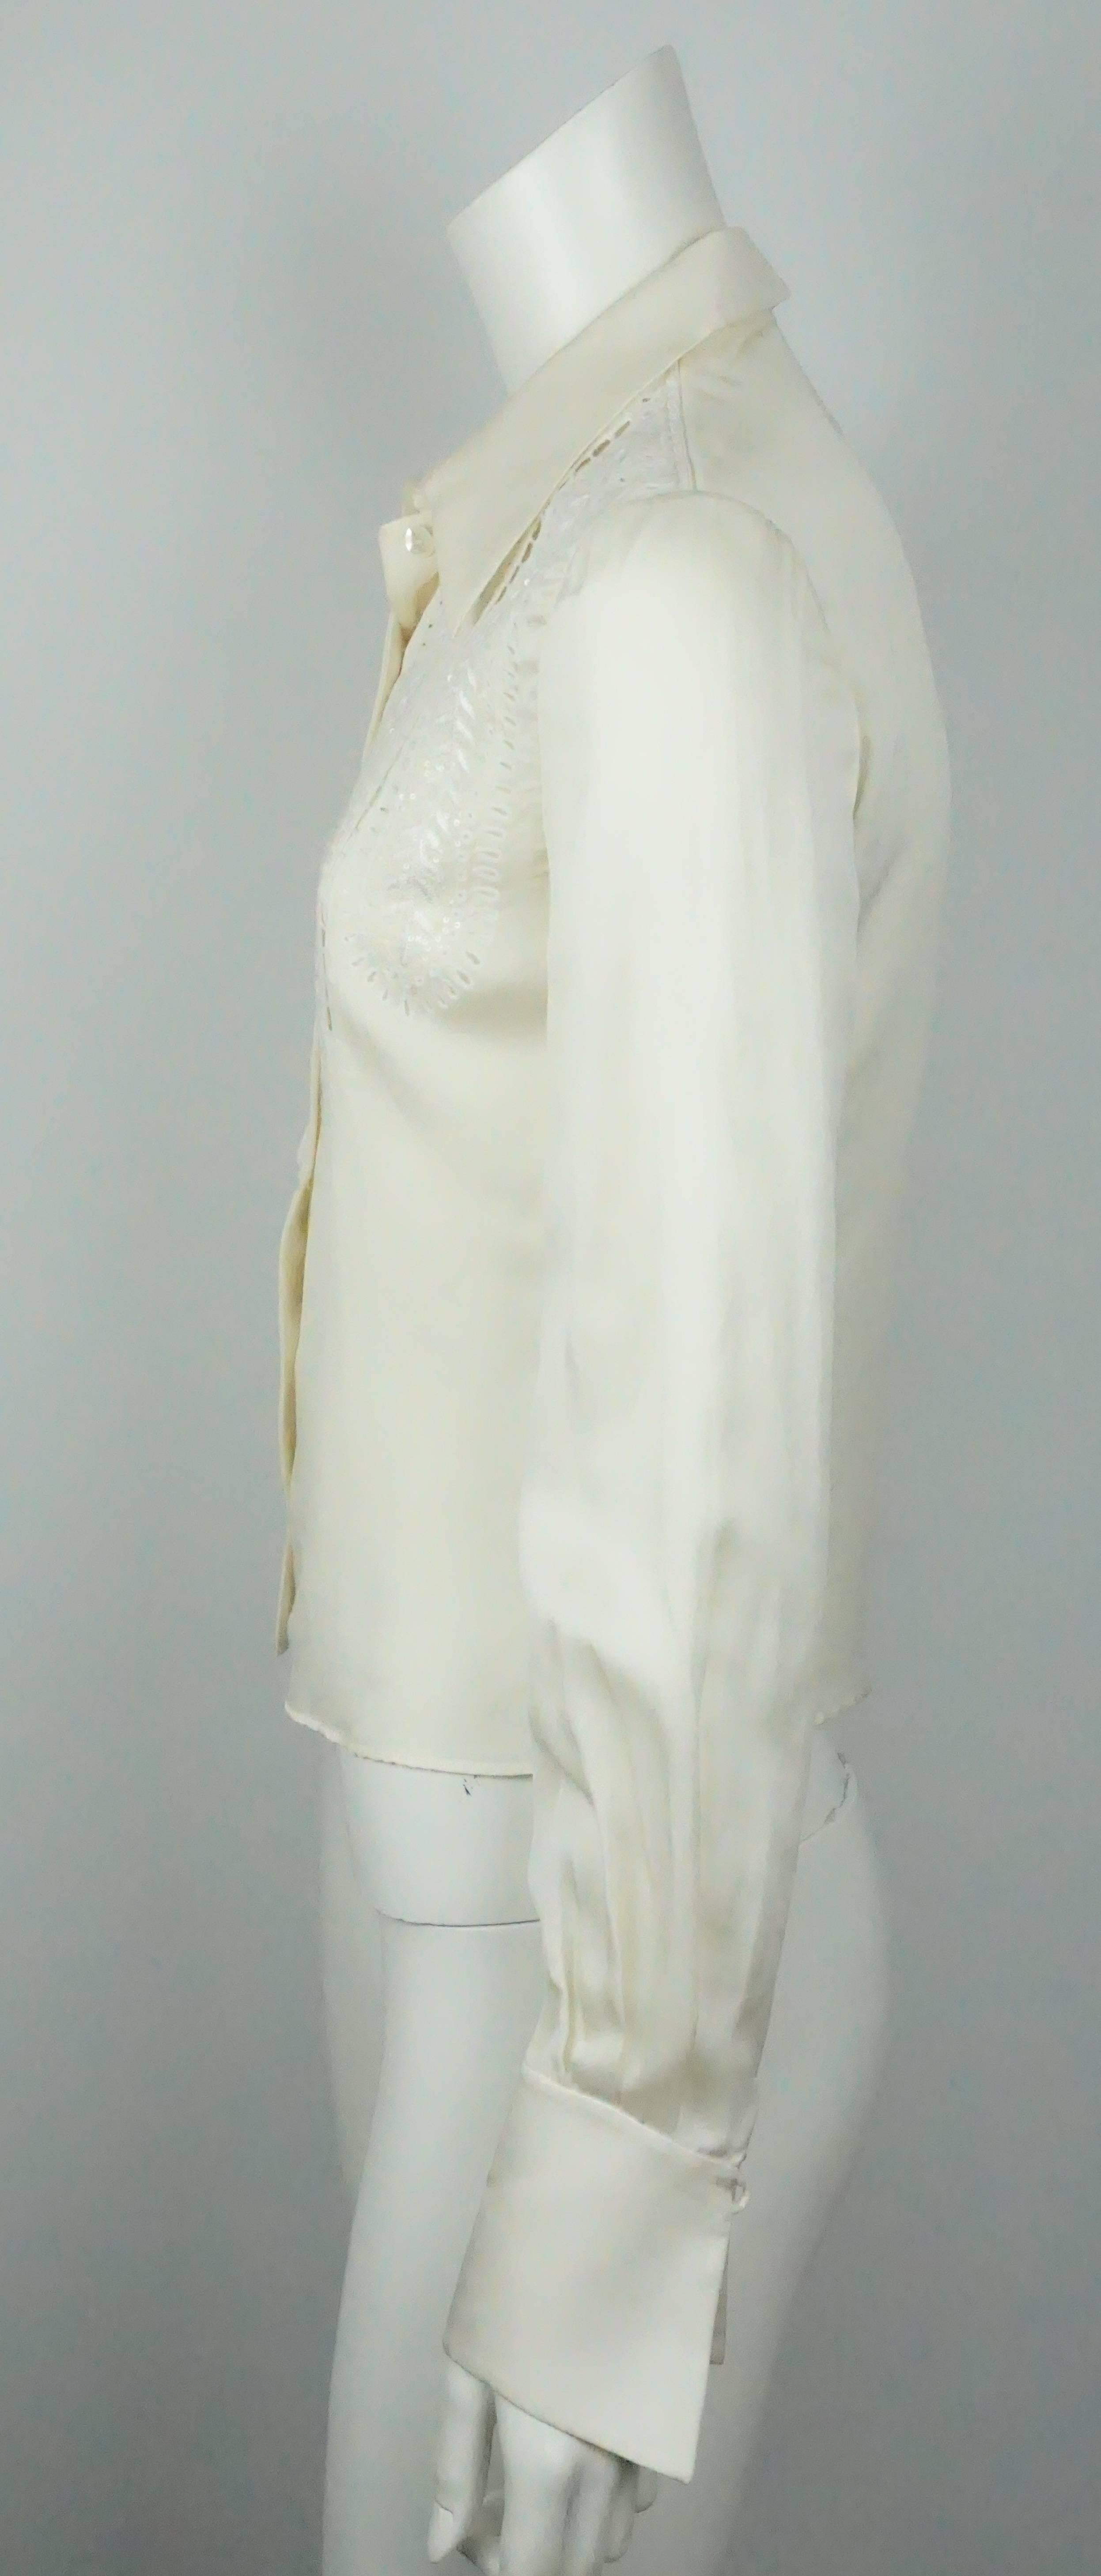 Valentino Ivory Silk Long Sleeve Top w/ Eyelet Detail - 4   This beautiful silk top is in excellent condition. The sleeves have a slight peasant sleeve effect to it and the cuffs have a dramatic detail to them. The eyelet detail on the front of the